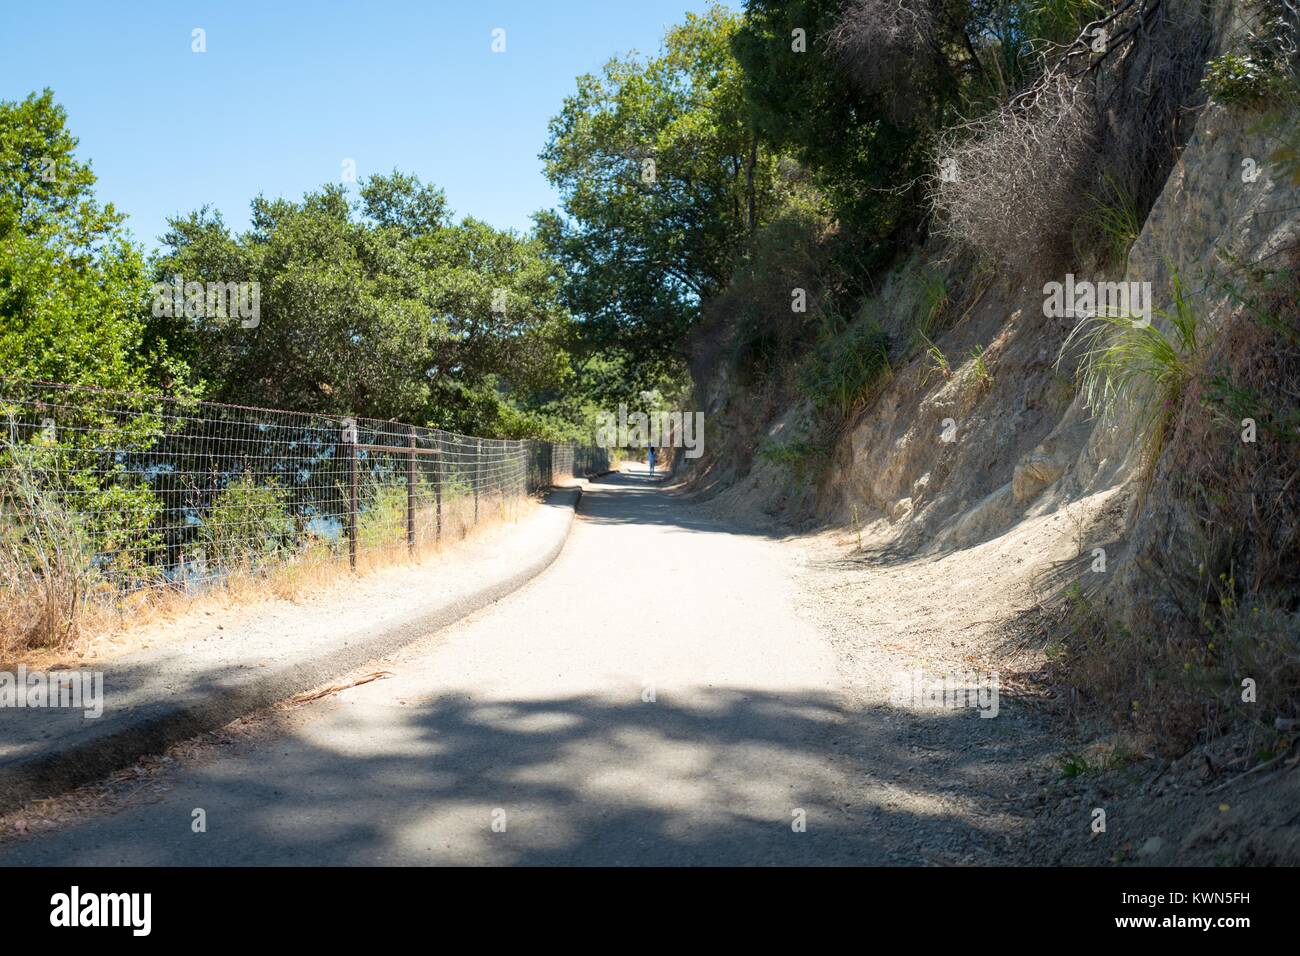 Trail at Lake Chabot Regional Park, an East Bay Regional Park in the San Francisco Bay Area town of San Leandro, California, July 16, 2017. Stock Photo